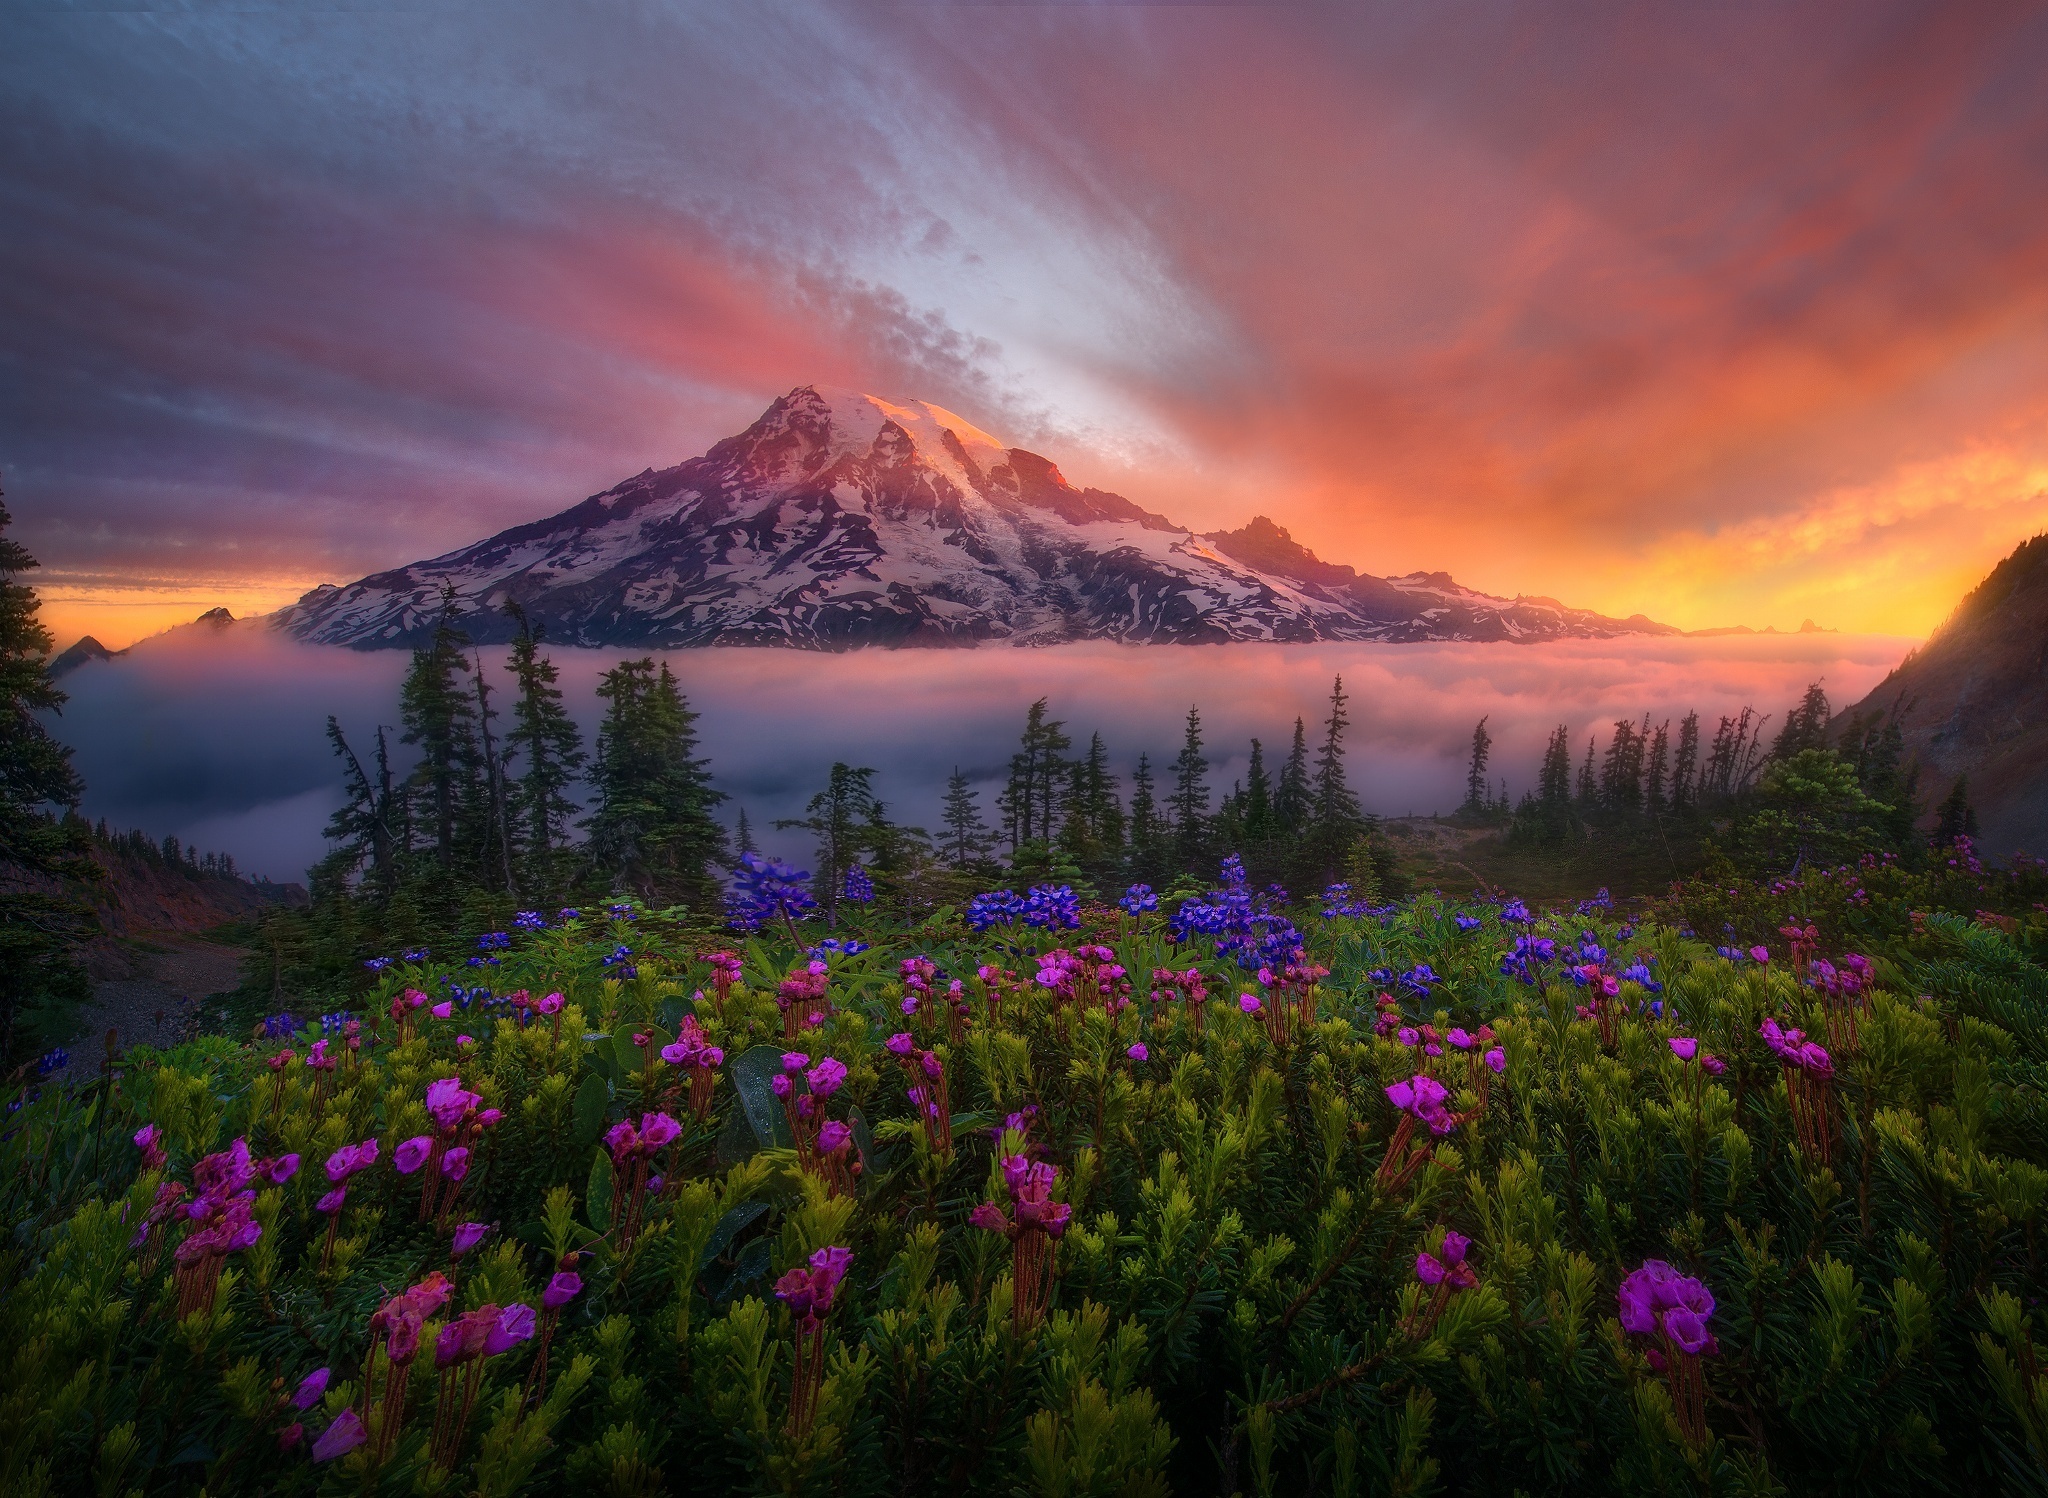 Tahoma the Great by Marc Adamus